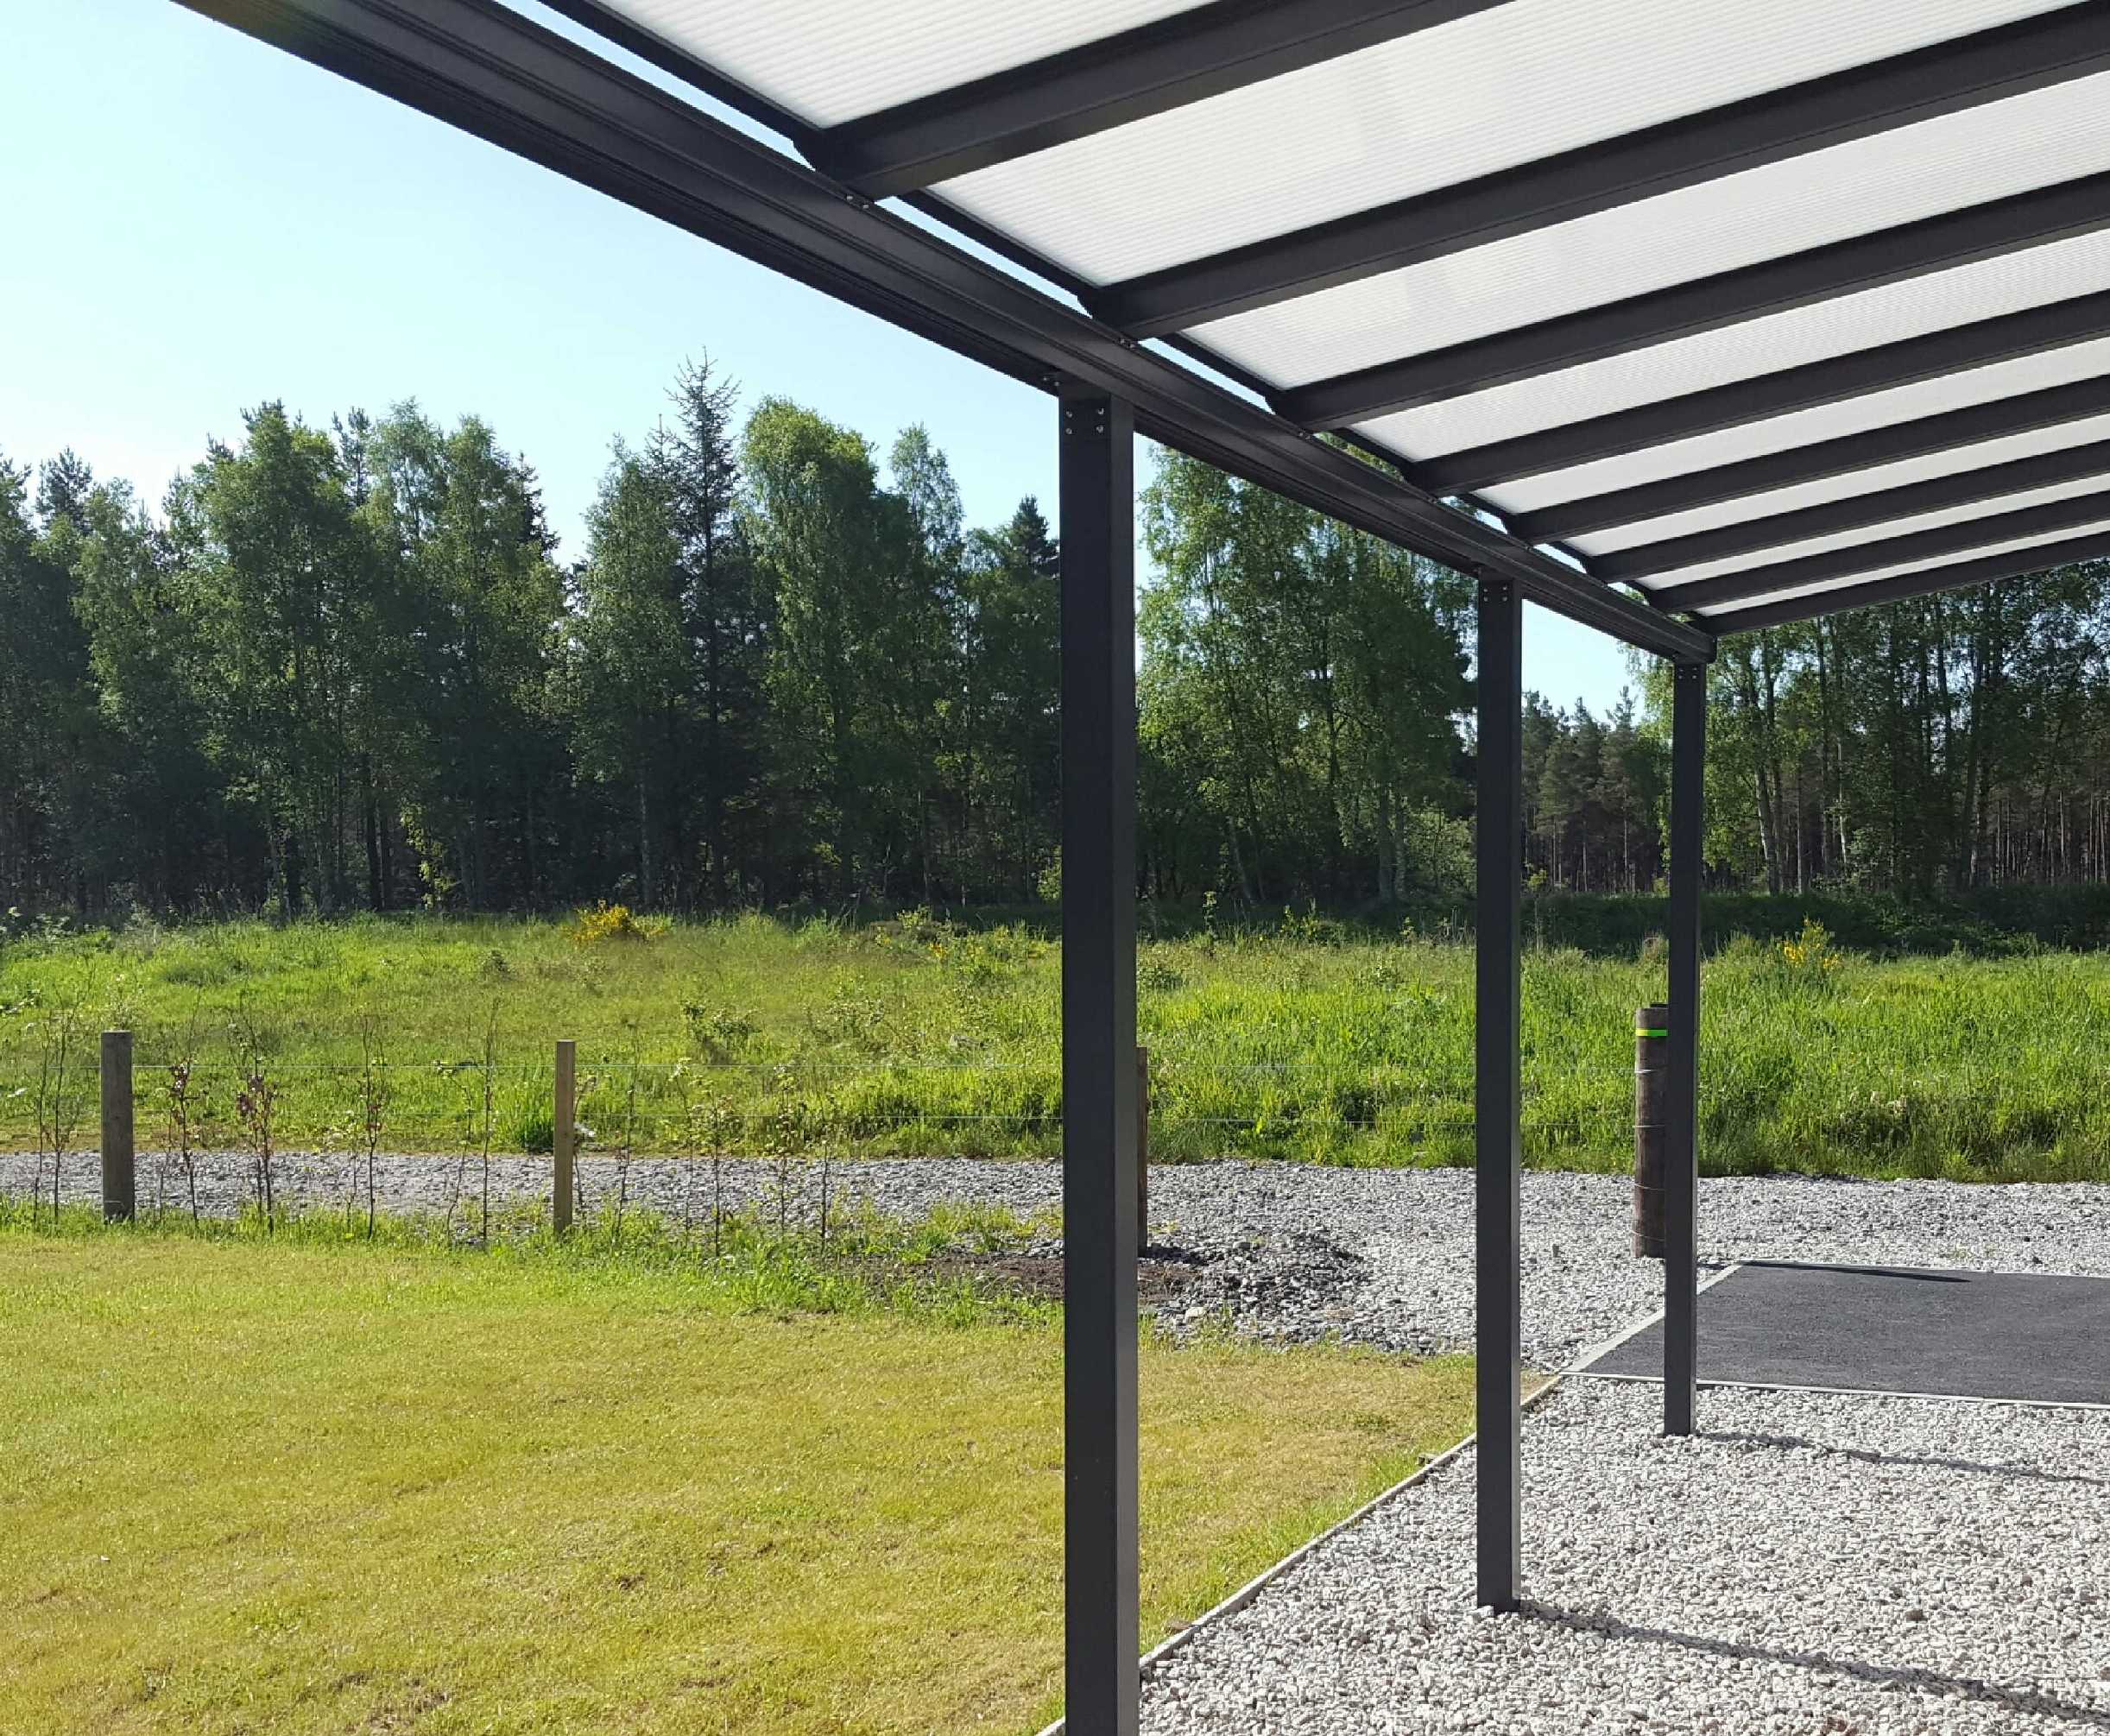 Omega Smart Lean-To Canopy, Anthracite Grey, 6mm Glass Clear Plate Polycarbonate Glazing - 8.4m (W) x 3.0m (P), (4) Supporting Posts